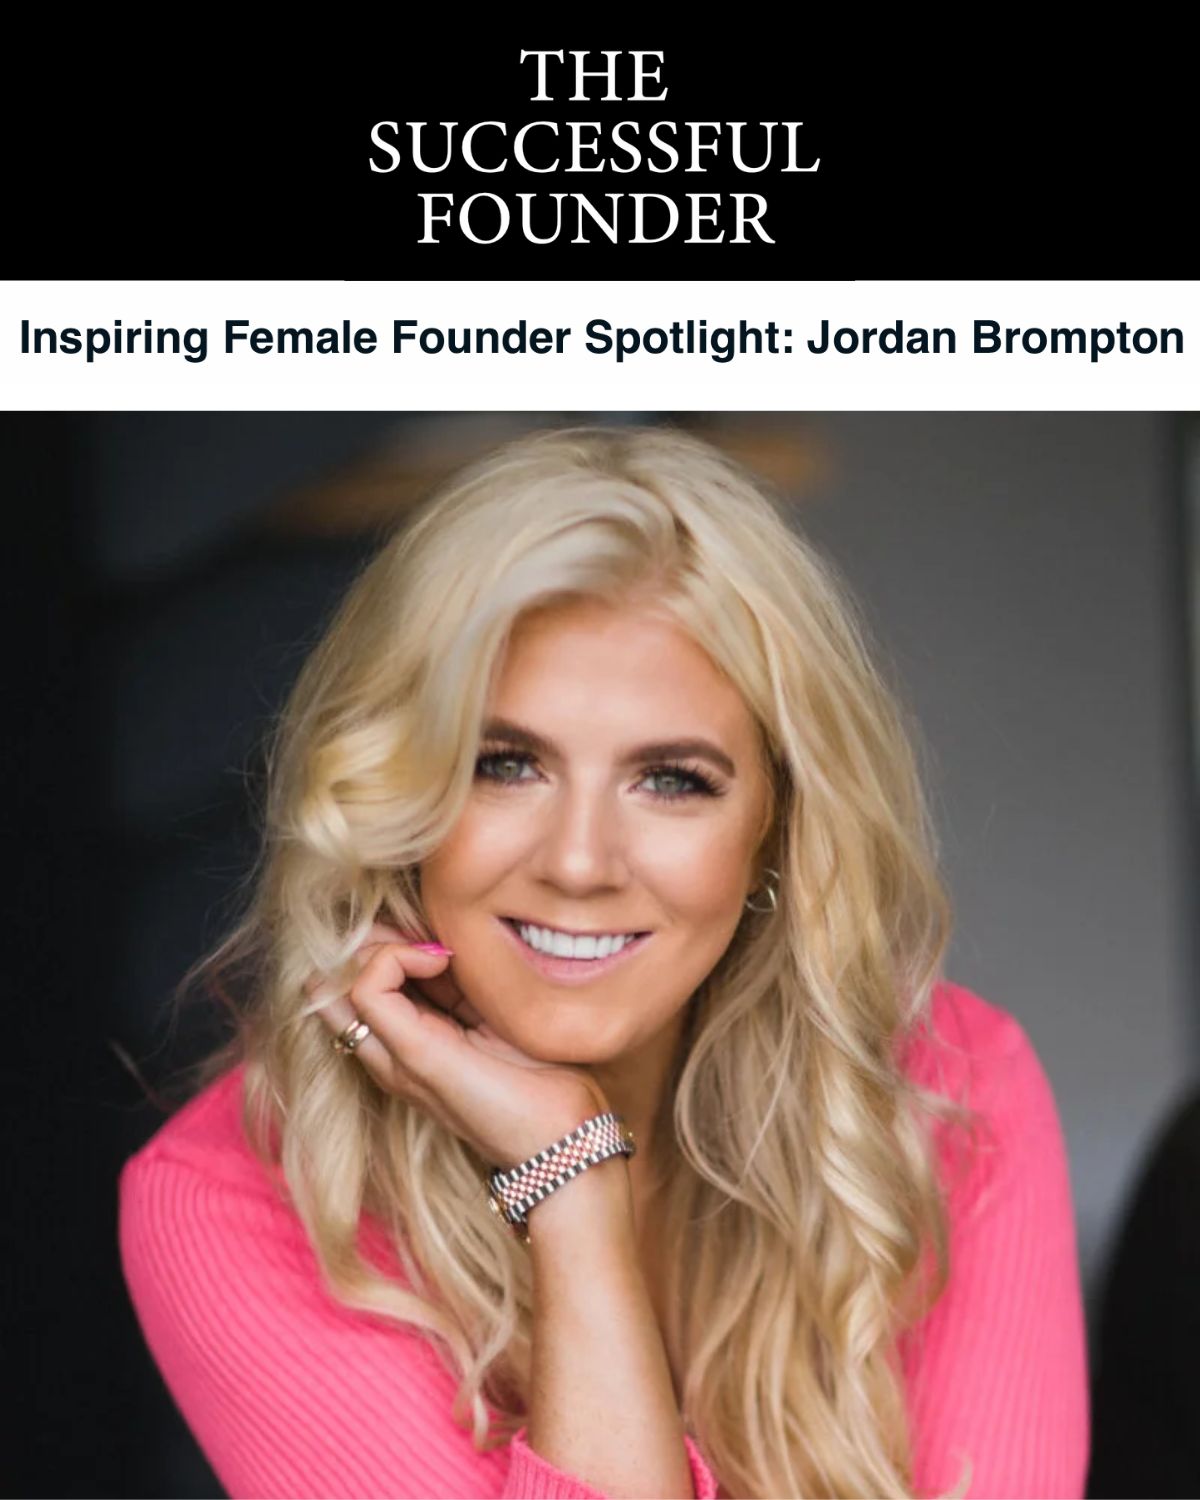 A photo of Jordan Brompton with 'The Successful Founder' written above